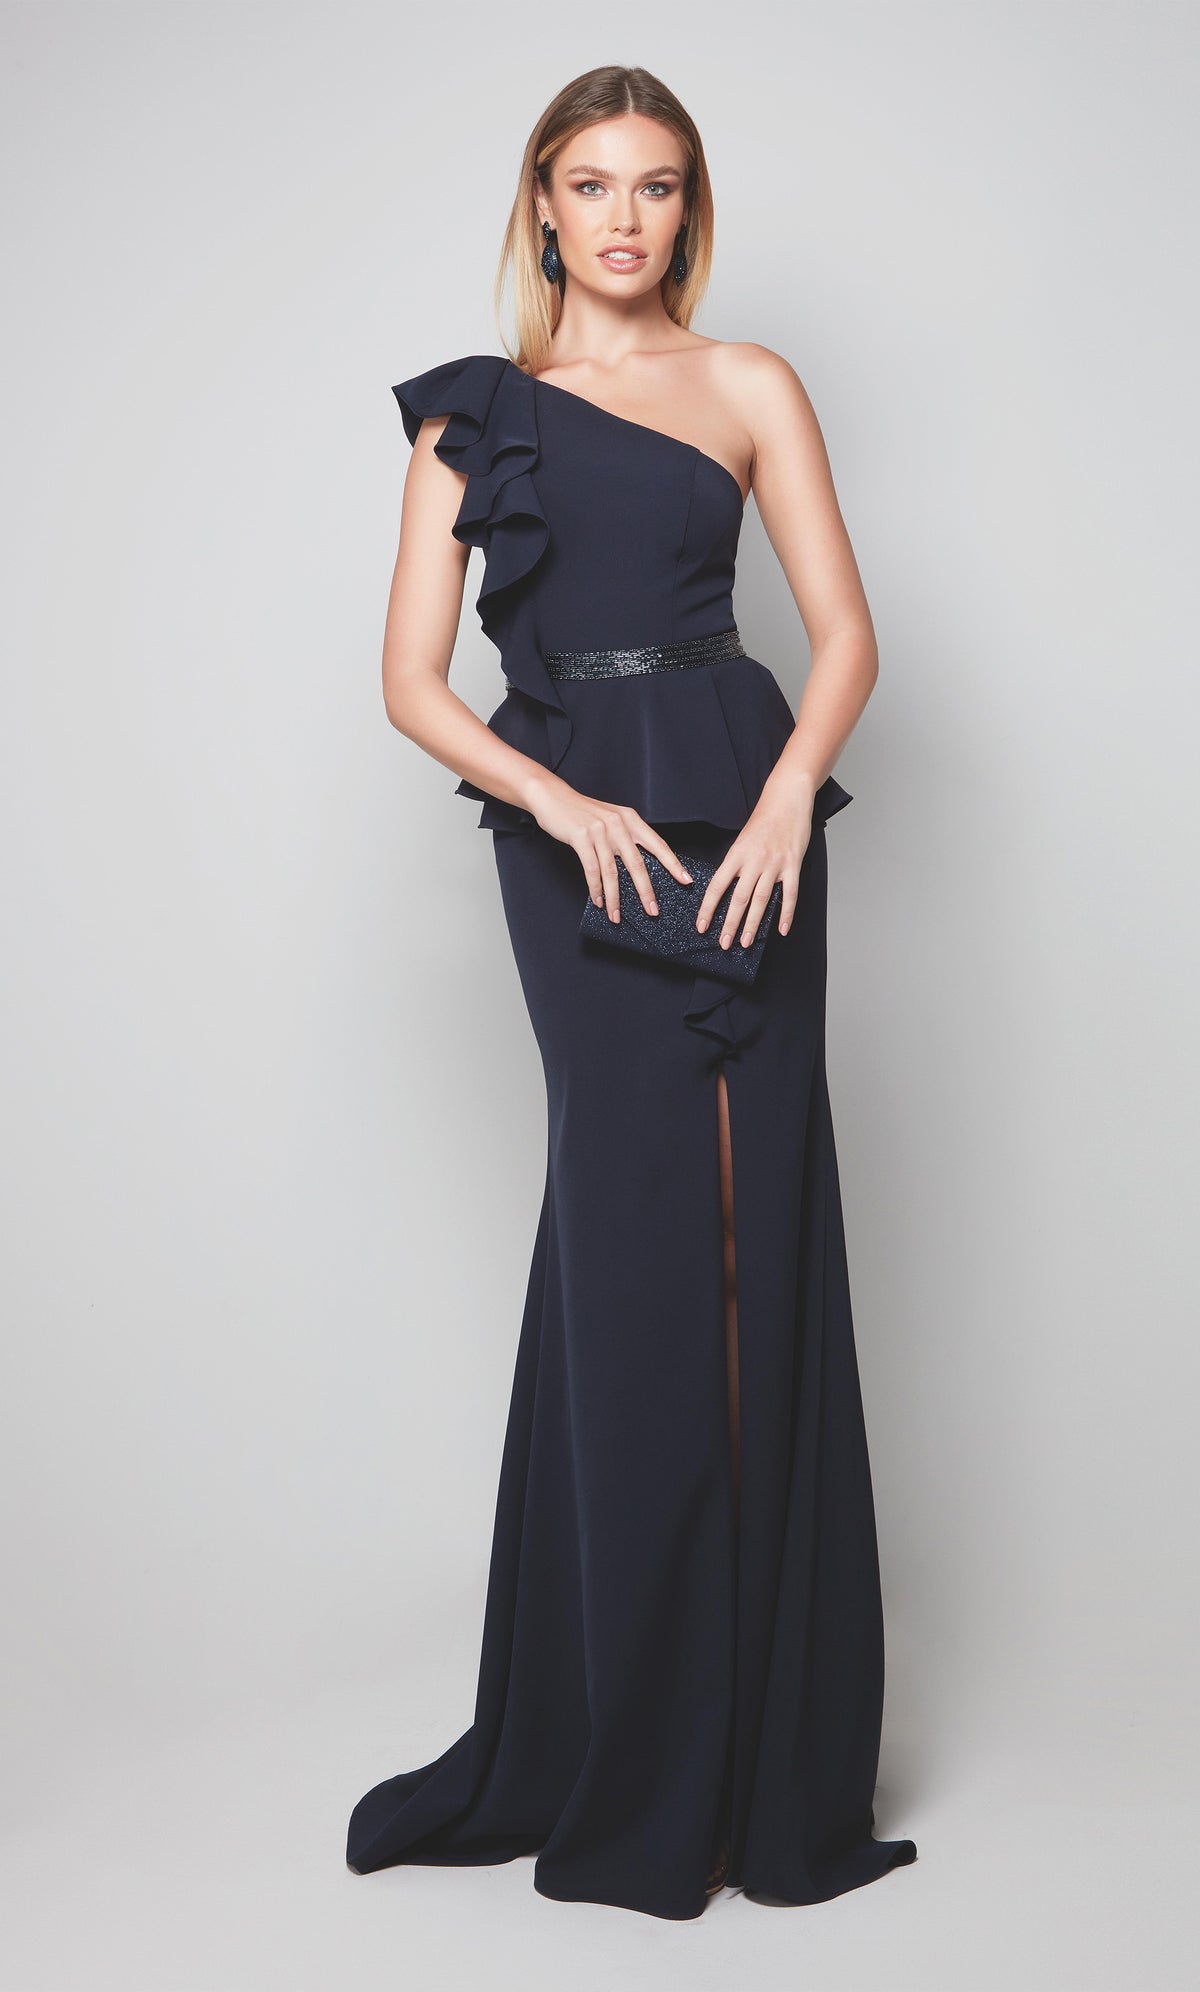 One shoulder formal dress with ruffle detail, faux beaded belt, and side slit in midnight blue.